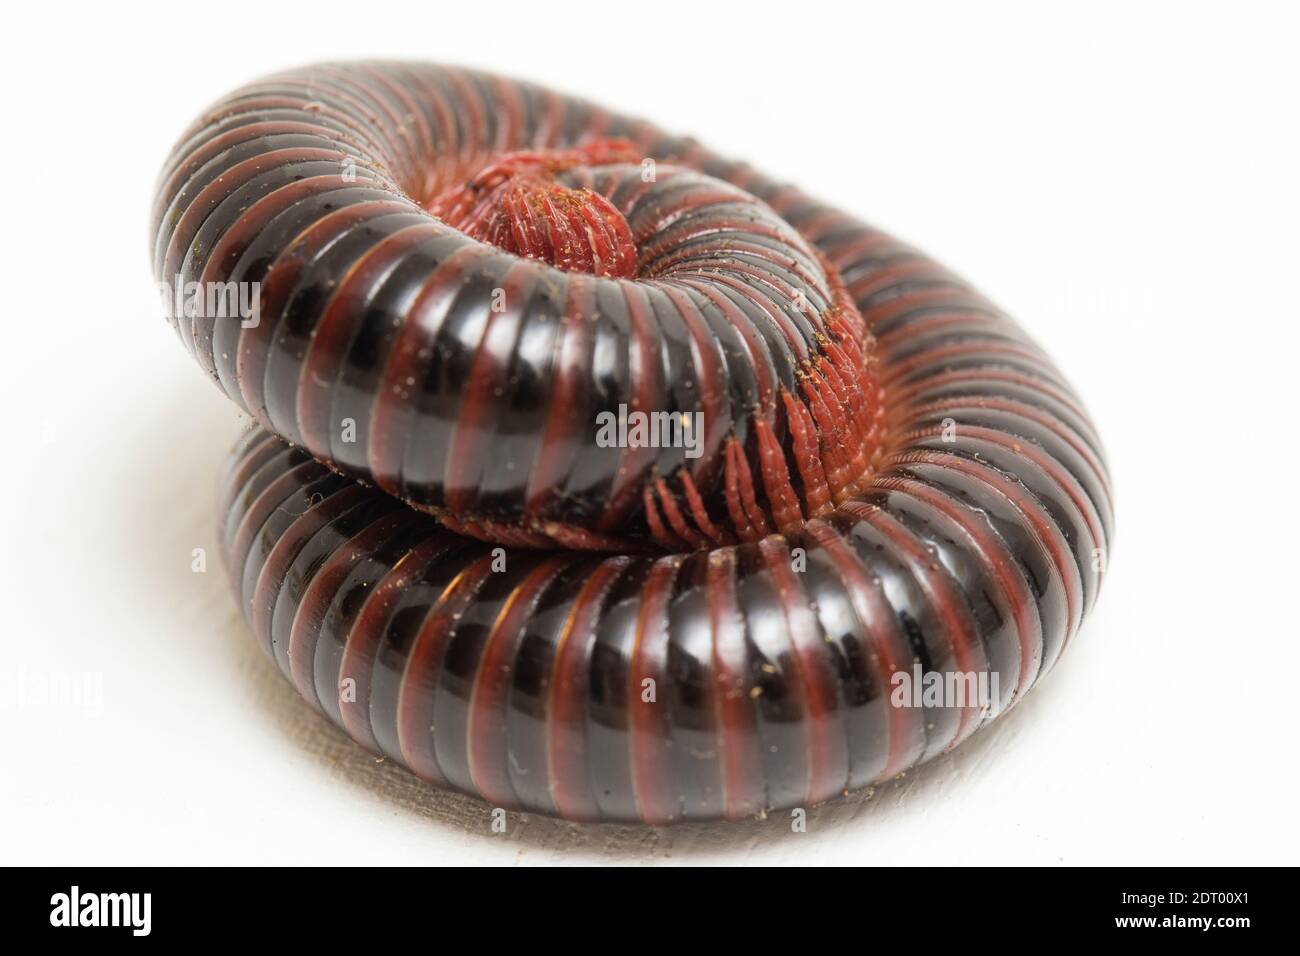 The millipede rolled into a circle isolated on white background Stock Photo